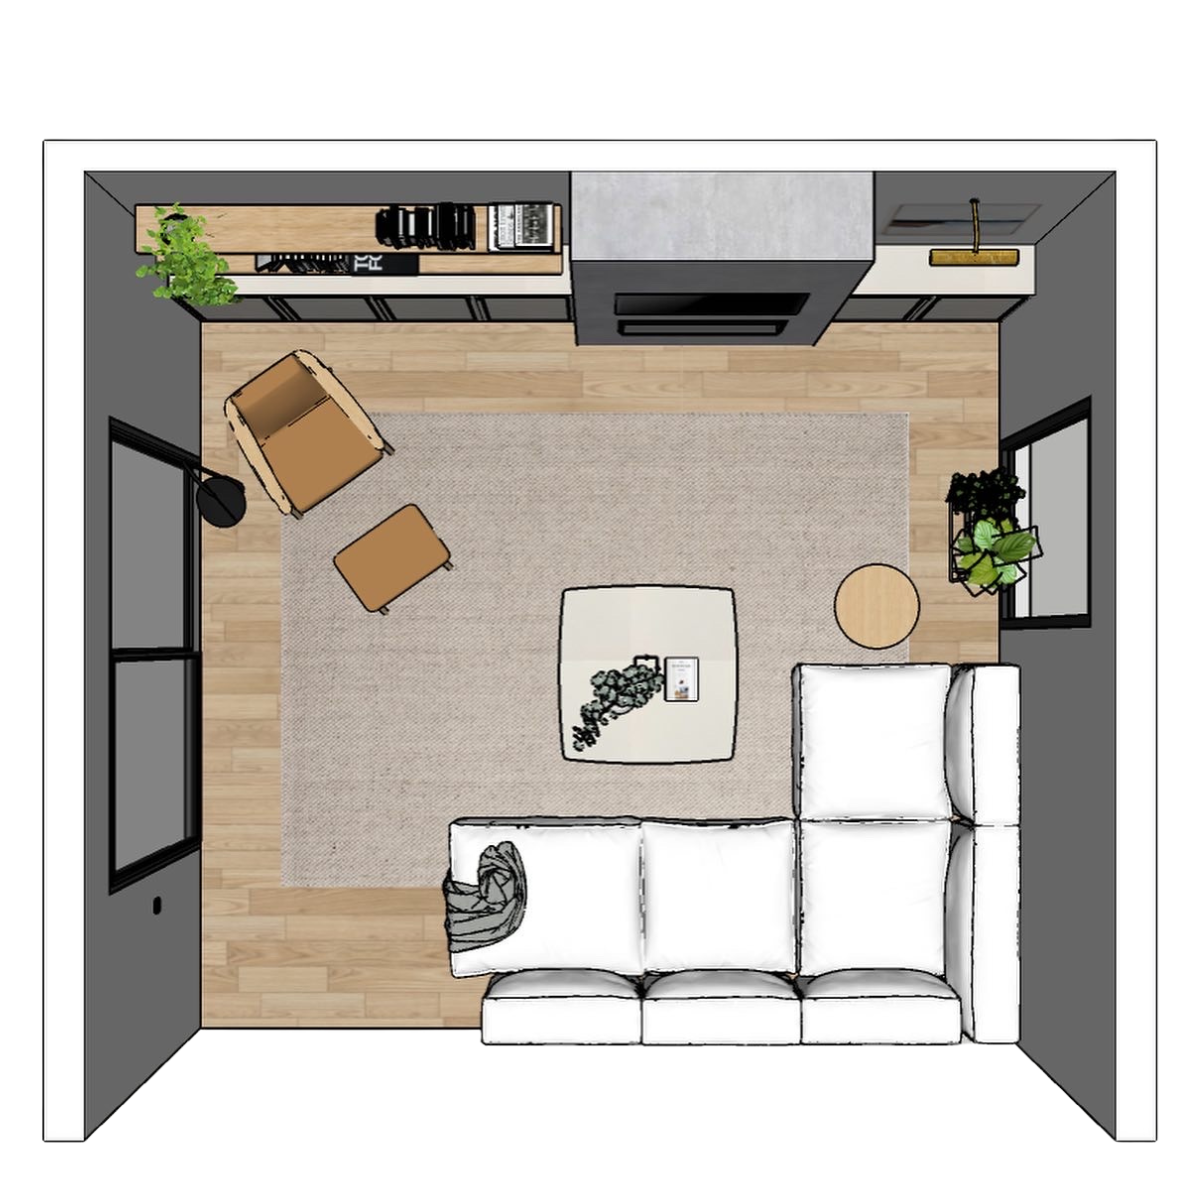 3D rendering of a room with furnishings in SketchUp for a customer